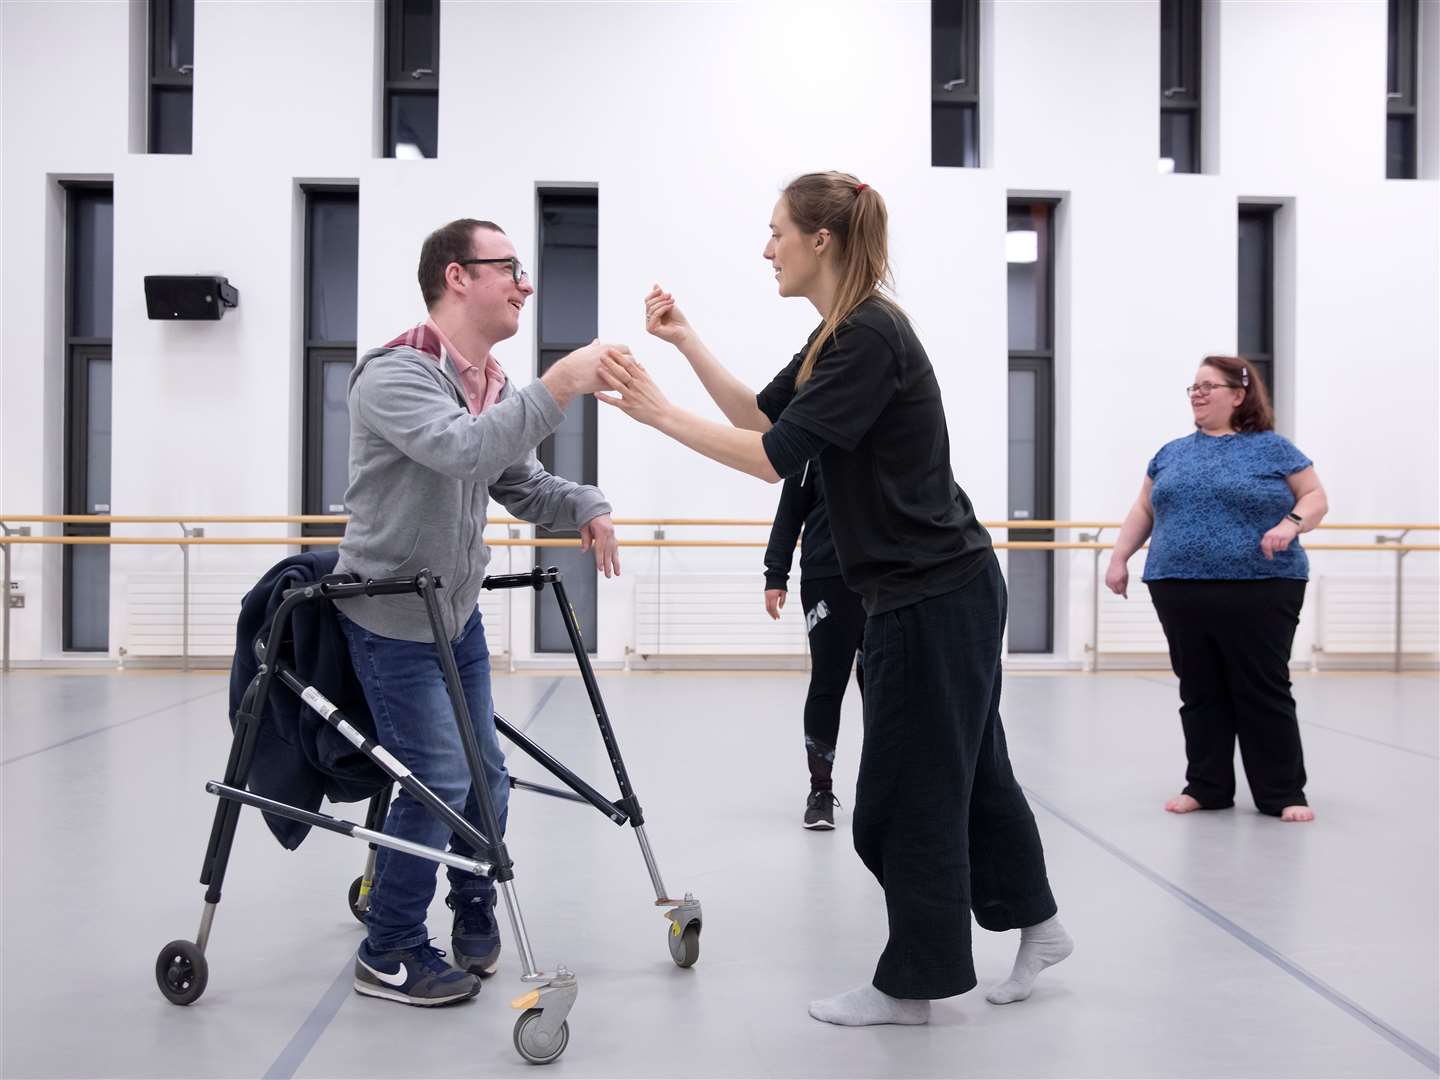 DanceEast's Springboard scheme helps those with complex needs or disabilities move and dance. Picture: Rachel Cherry